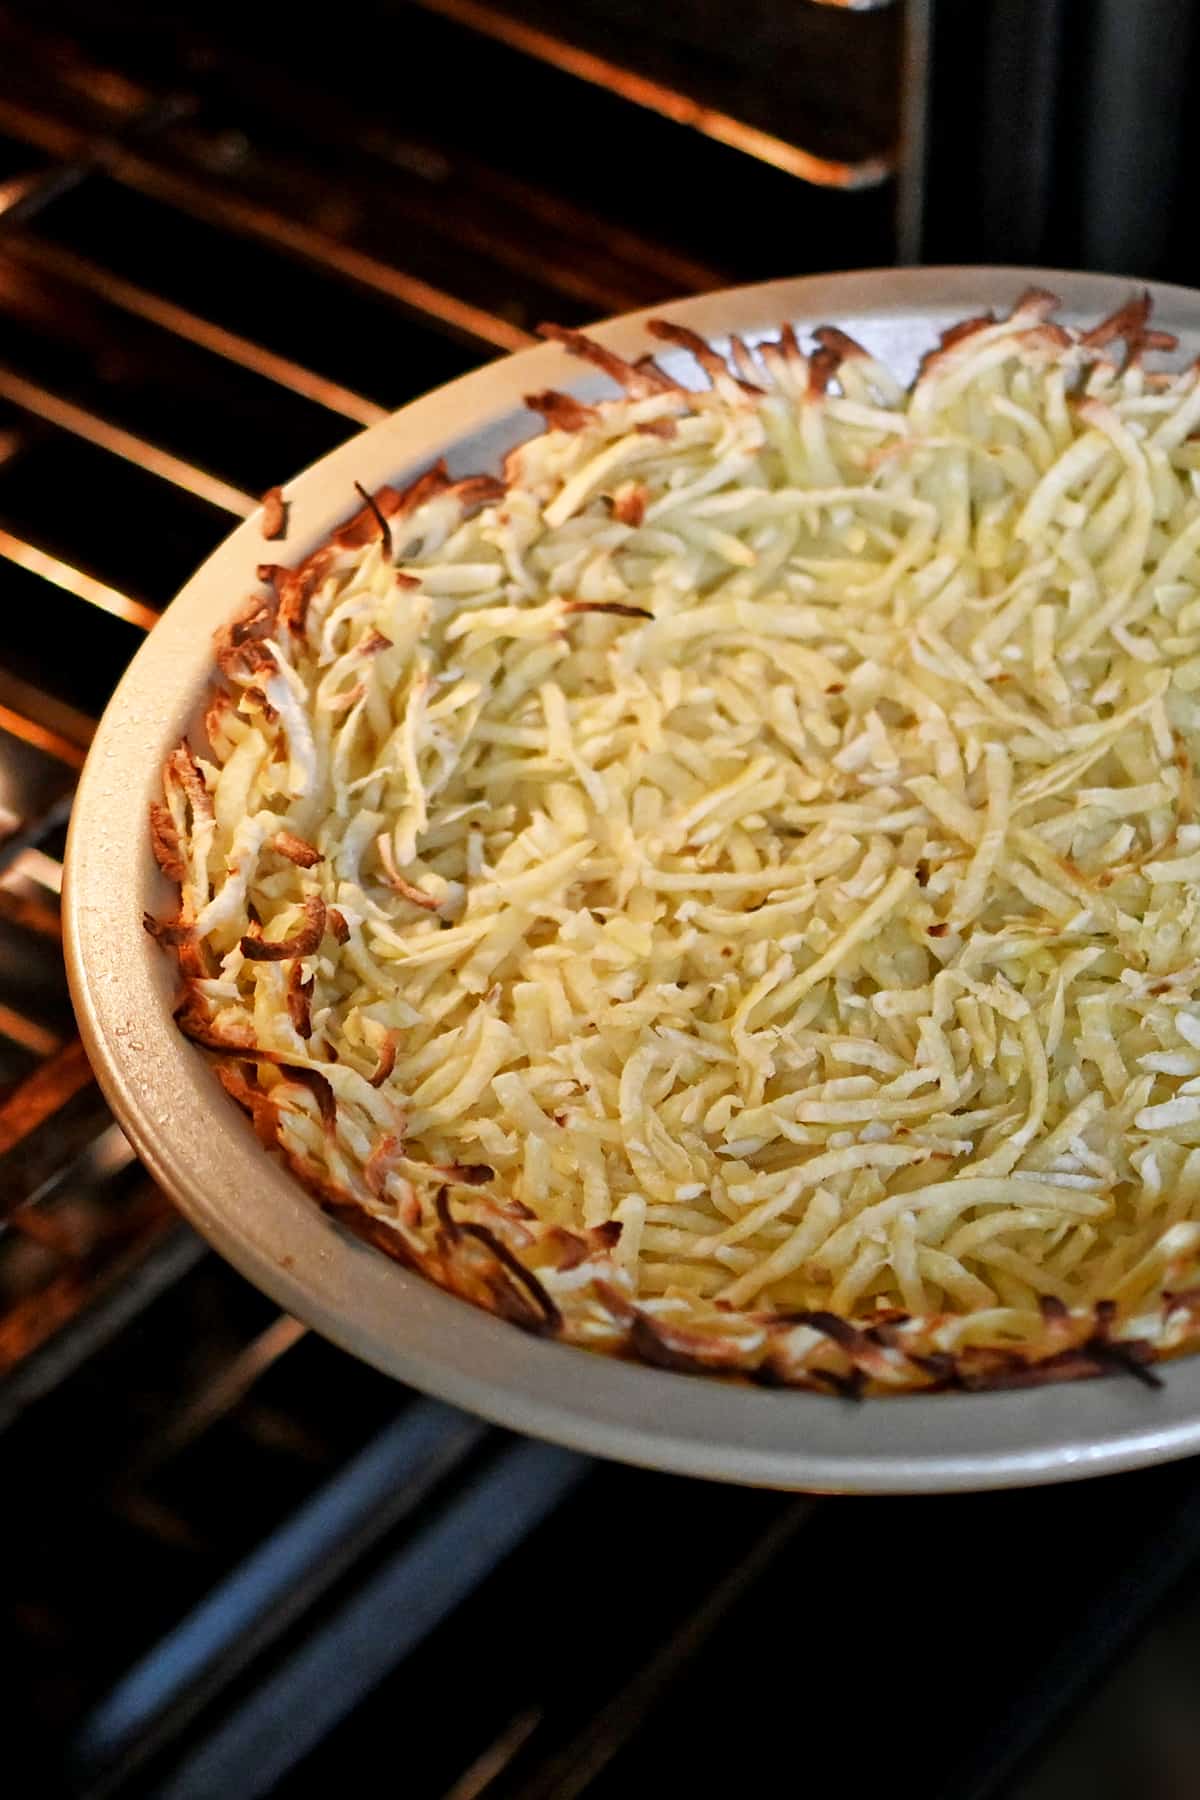 A baked shredded potato crust coming out of the oven.